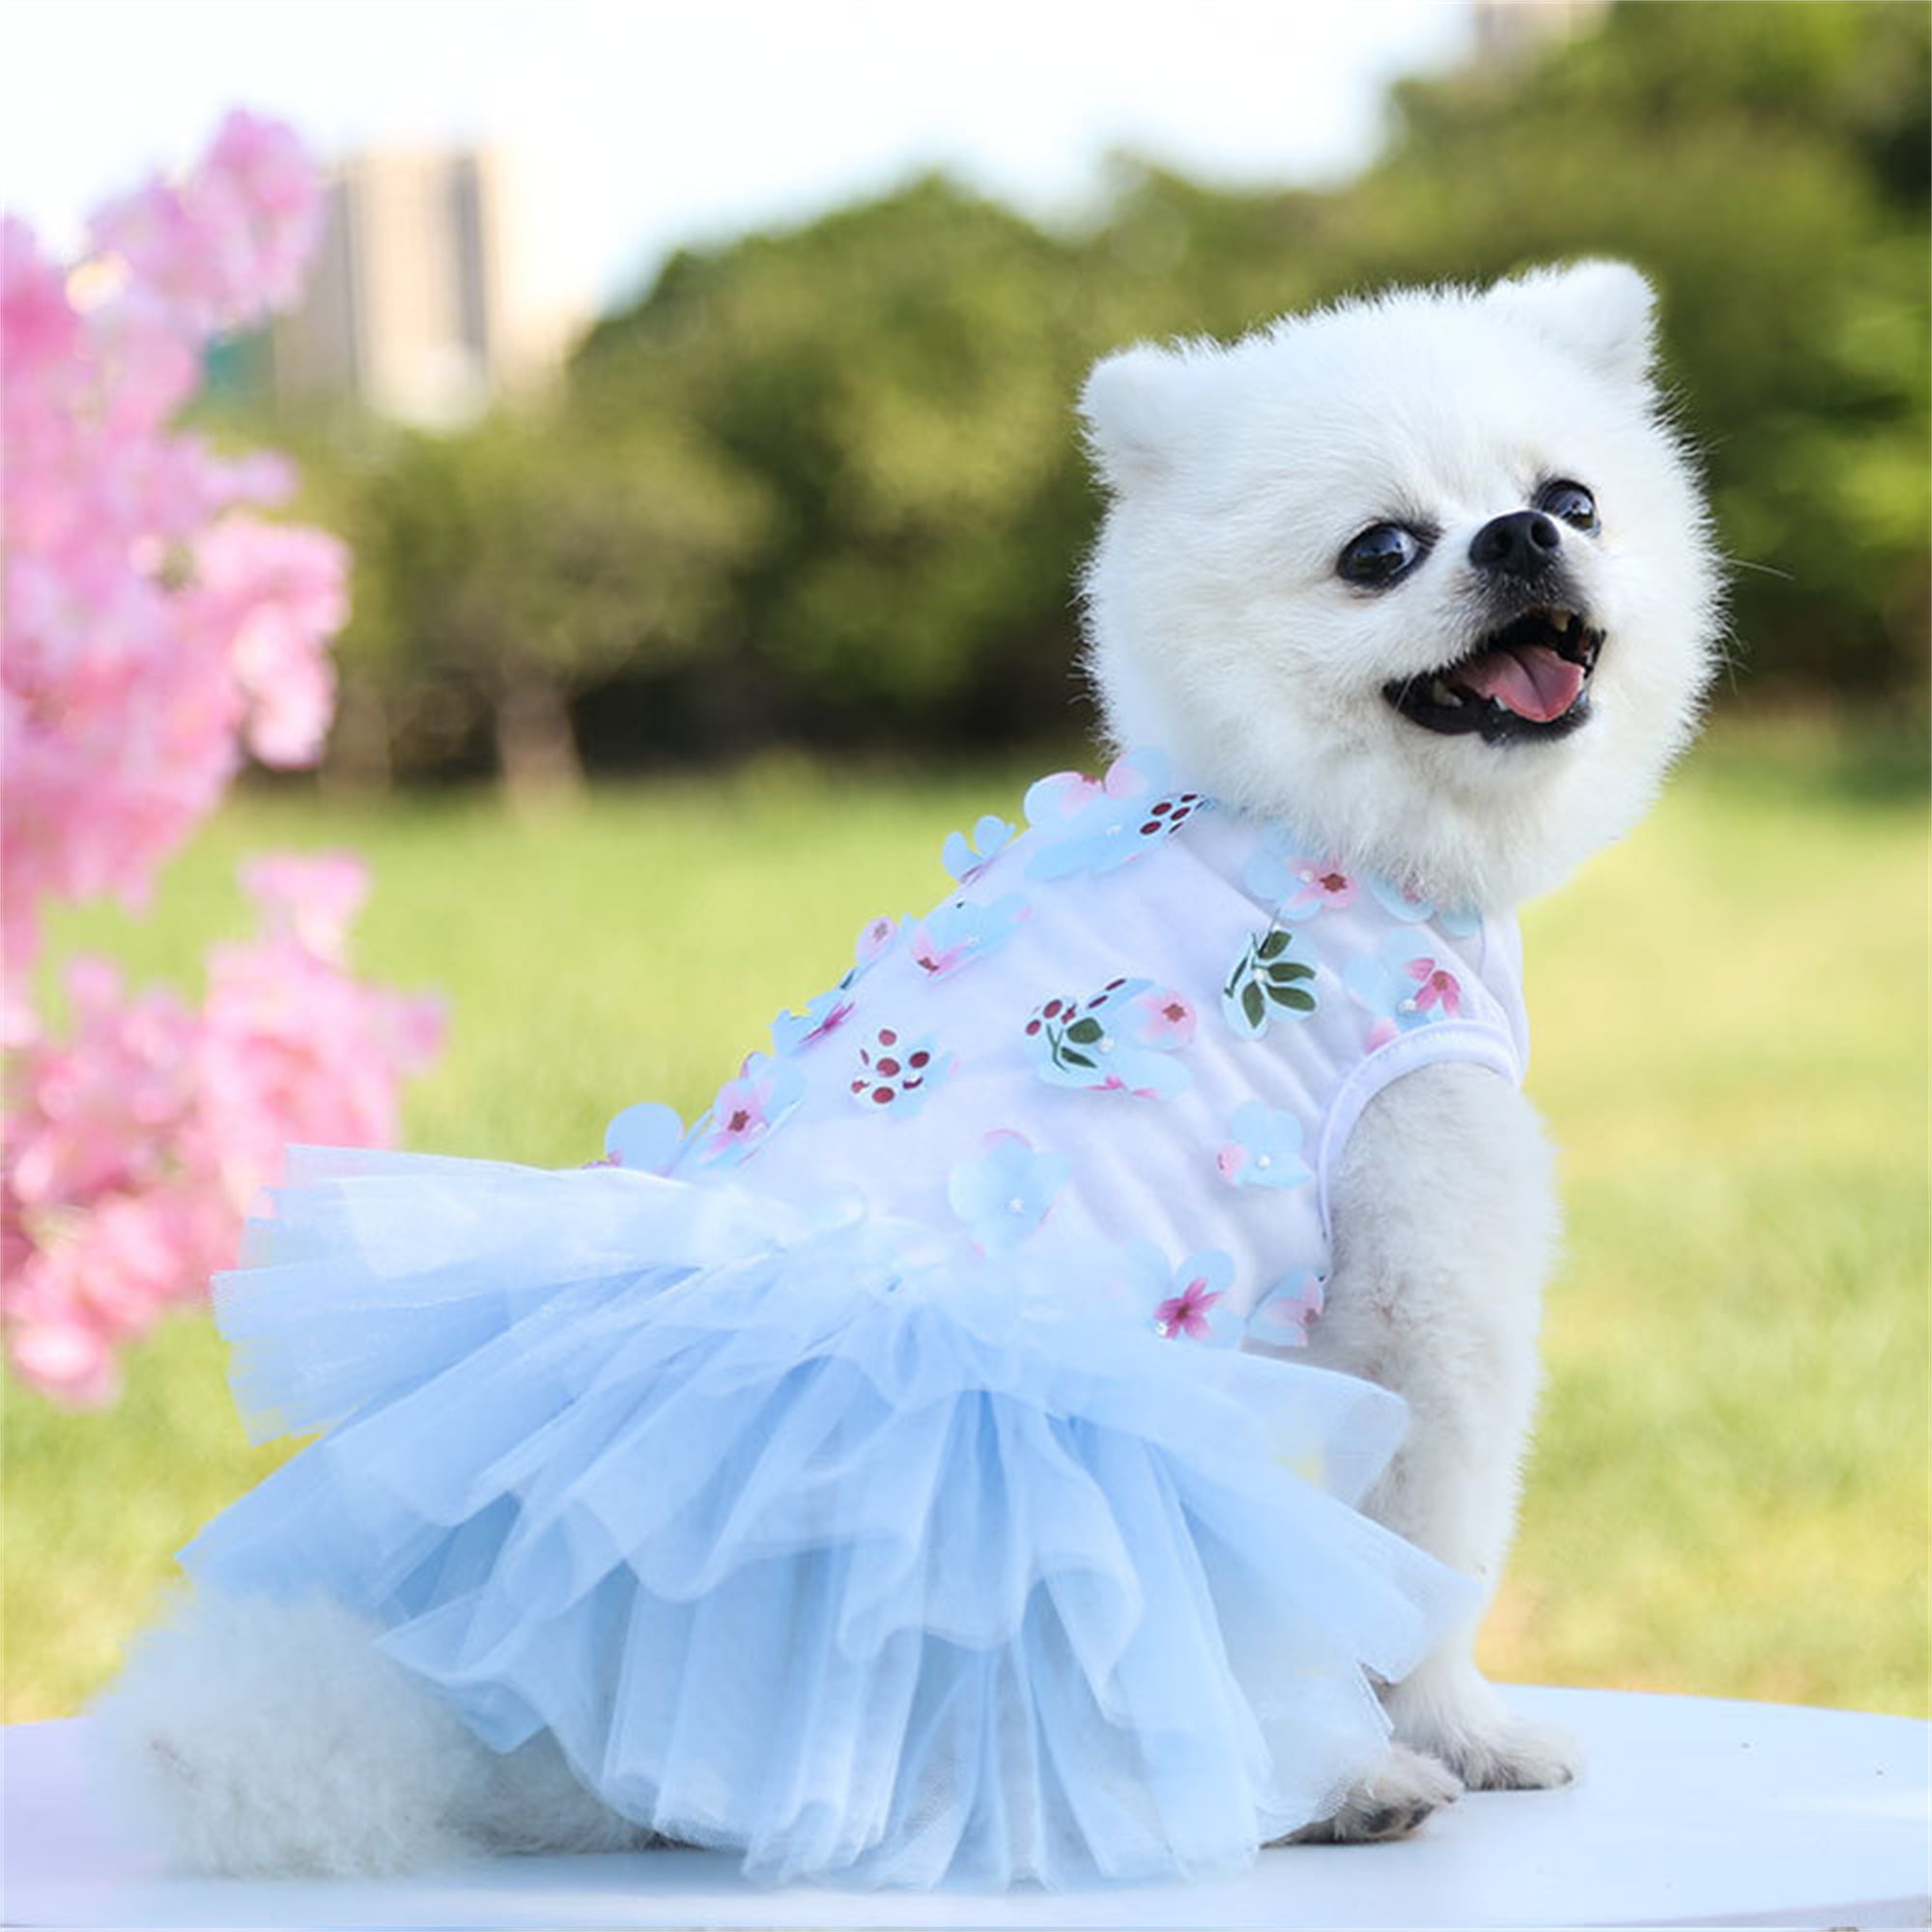 Rose Red, Red,Medium 2 Pieces Small Dog Dress for Girl Puppy Dress Dog Skirt Pet Tutu Princess Dress Organza Floral Puppy Dresses Apparel for Small to Large Pets Cats Dogs Girl Outfits 